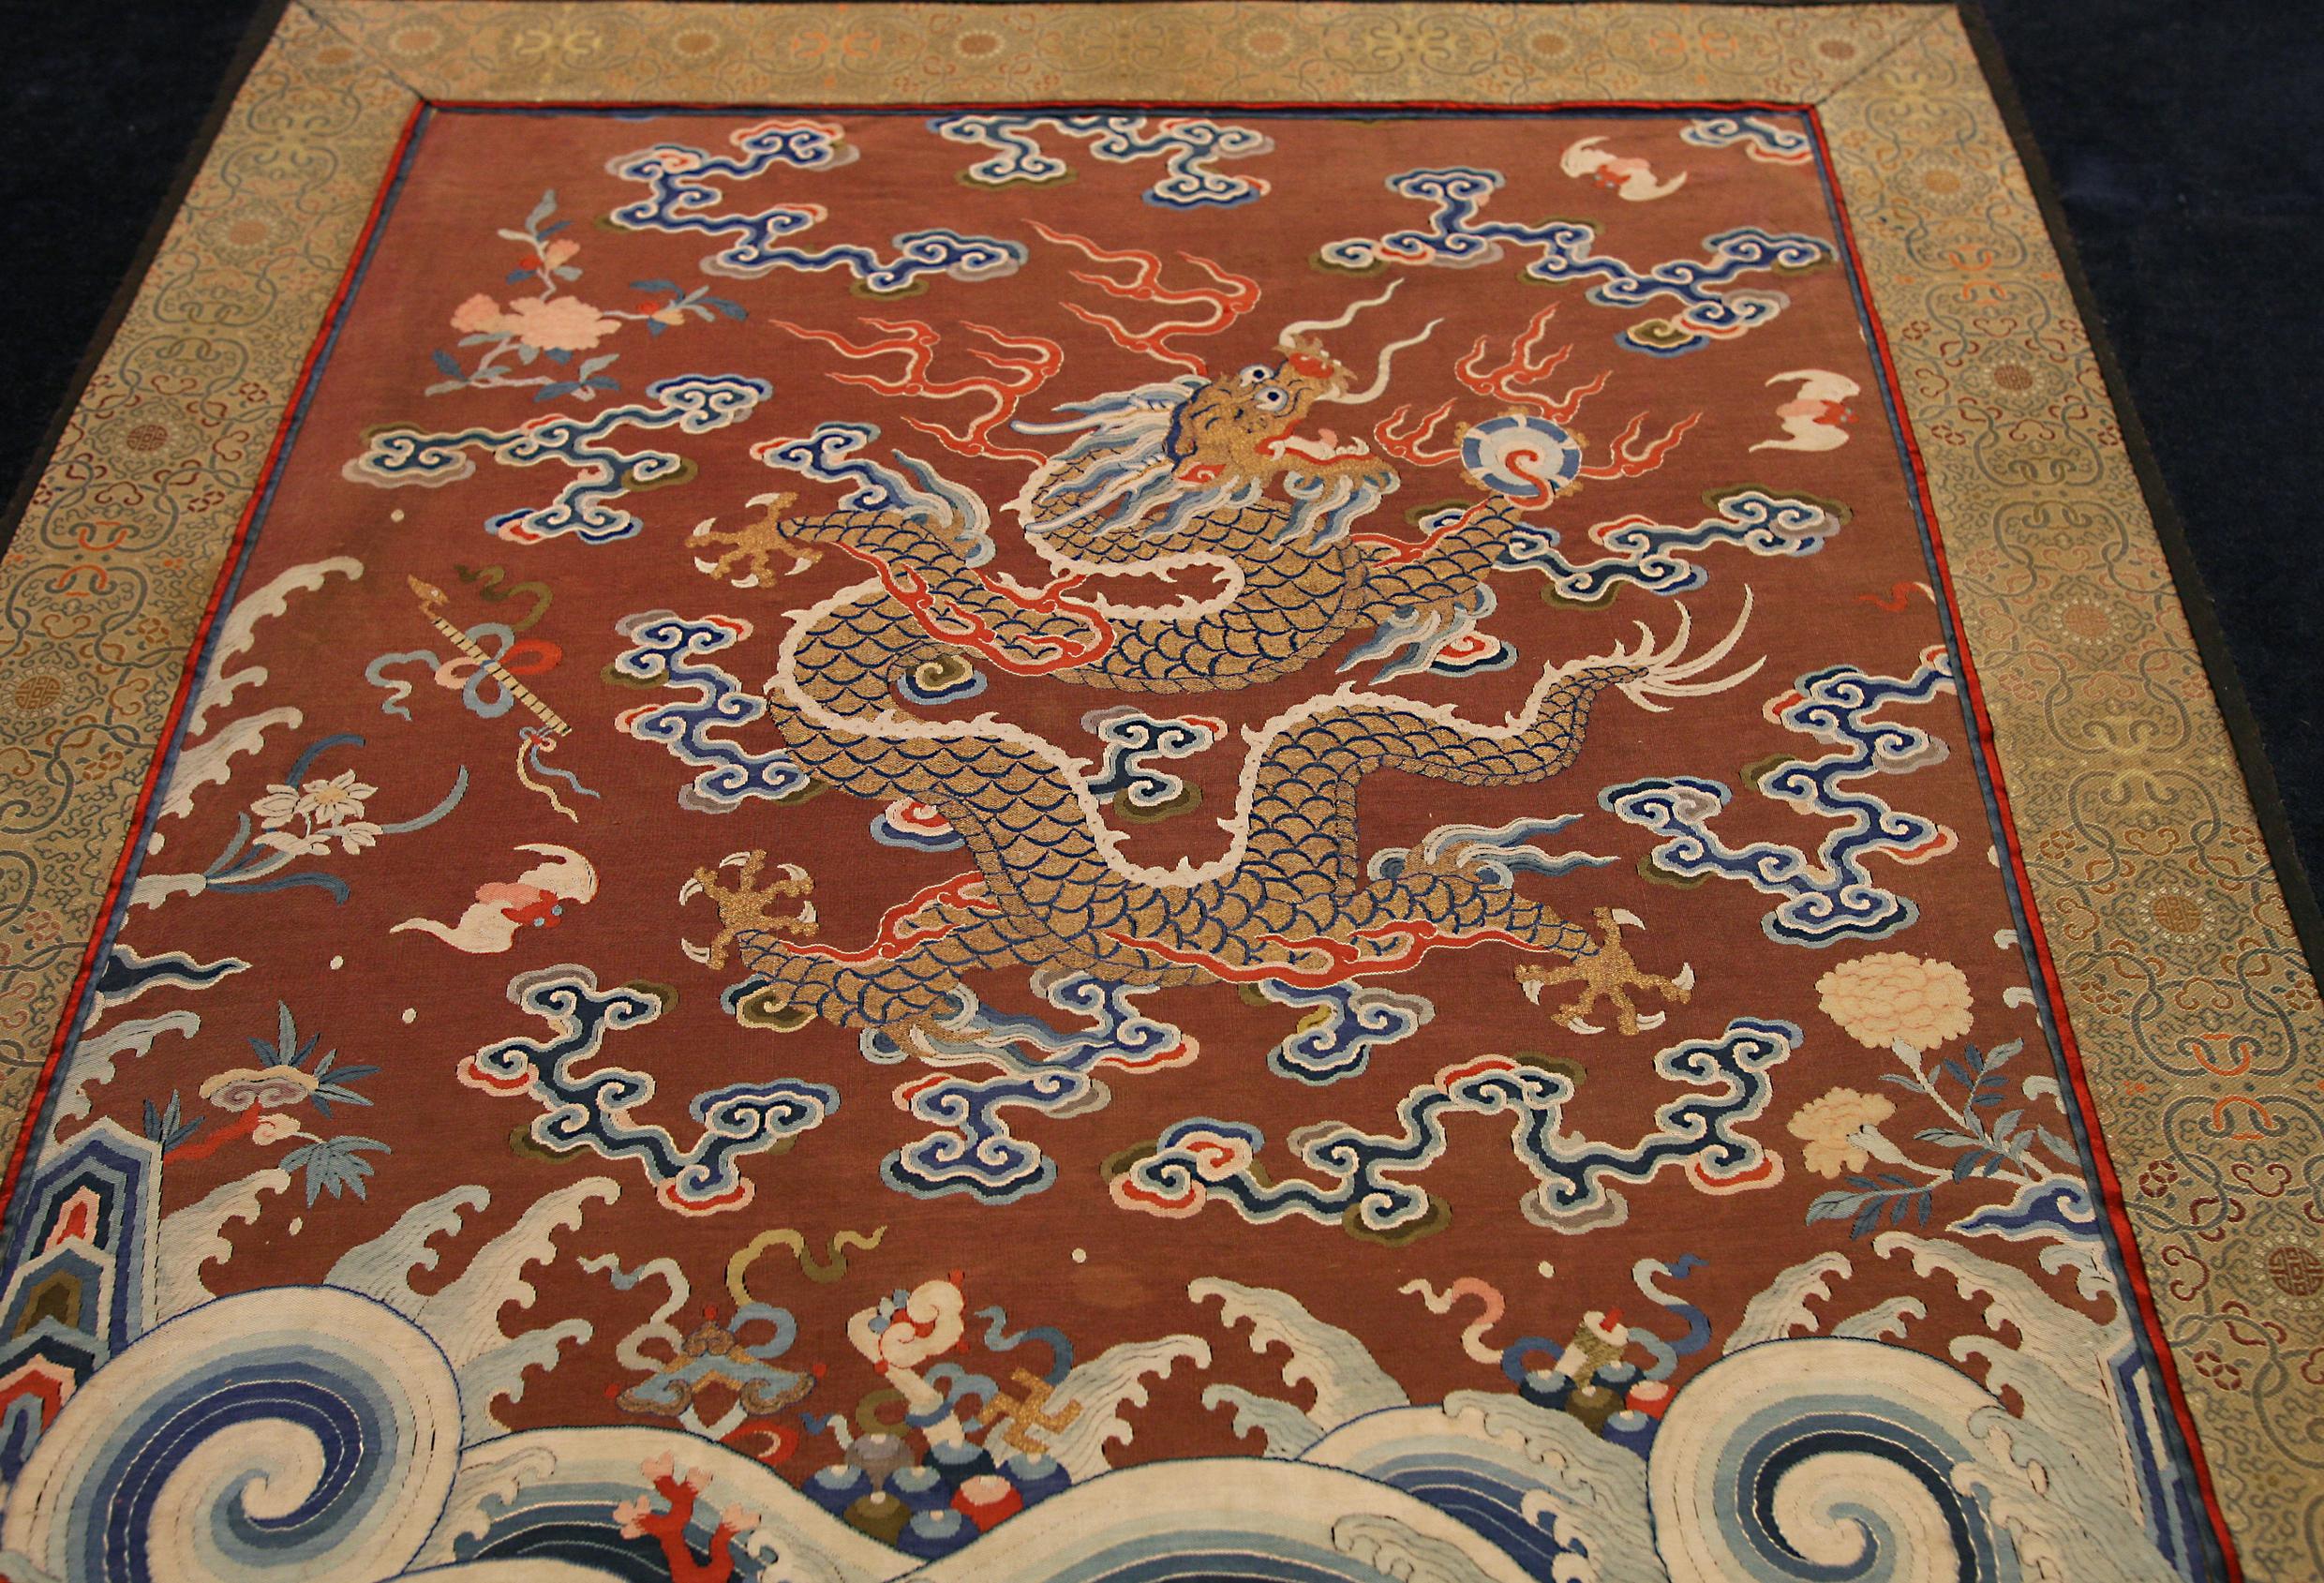 This is an 18th-century imperial silk Chinese textile that measures 79 x 47CM in size. This rare example has been preserved in excellent condition and has retained its dramatic saturated colors which create a dramatic color contrast with the brown